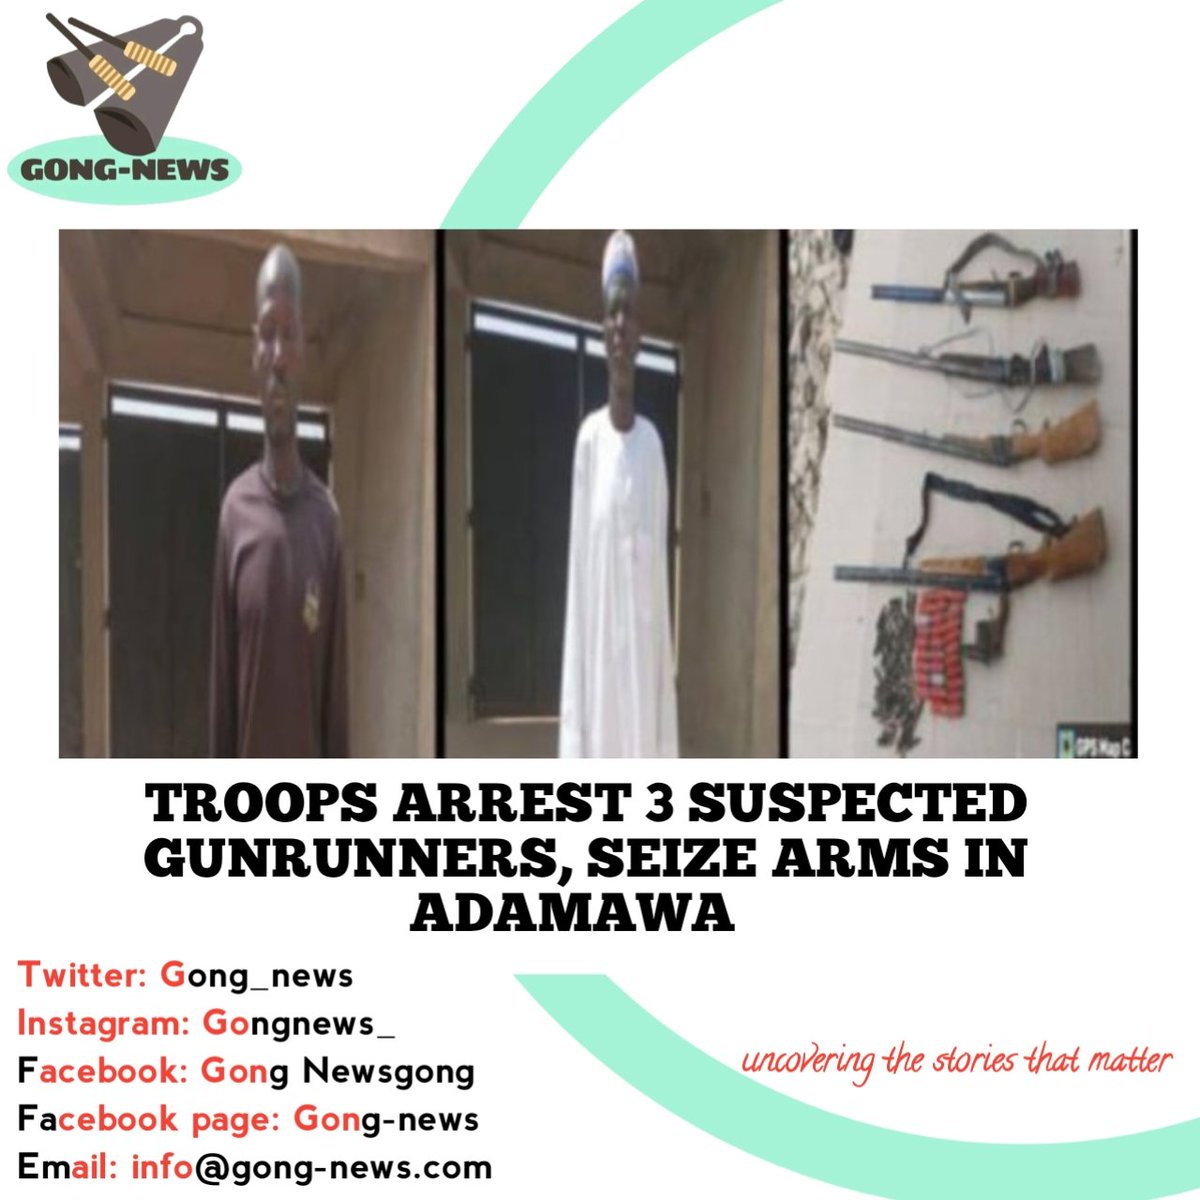 Nigerian Army troops have intercepted three persons suspected of gun-running in Sukuk Community in Madagali local government area of Adamawa State.

#Gong Newsgong #Gong-news #info@gong-news.com #trending #NewsUpdate  #newspaper #LatestNews  #LatestUpdates #NewsInNigeria